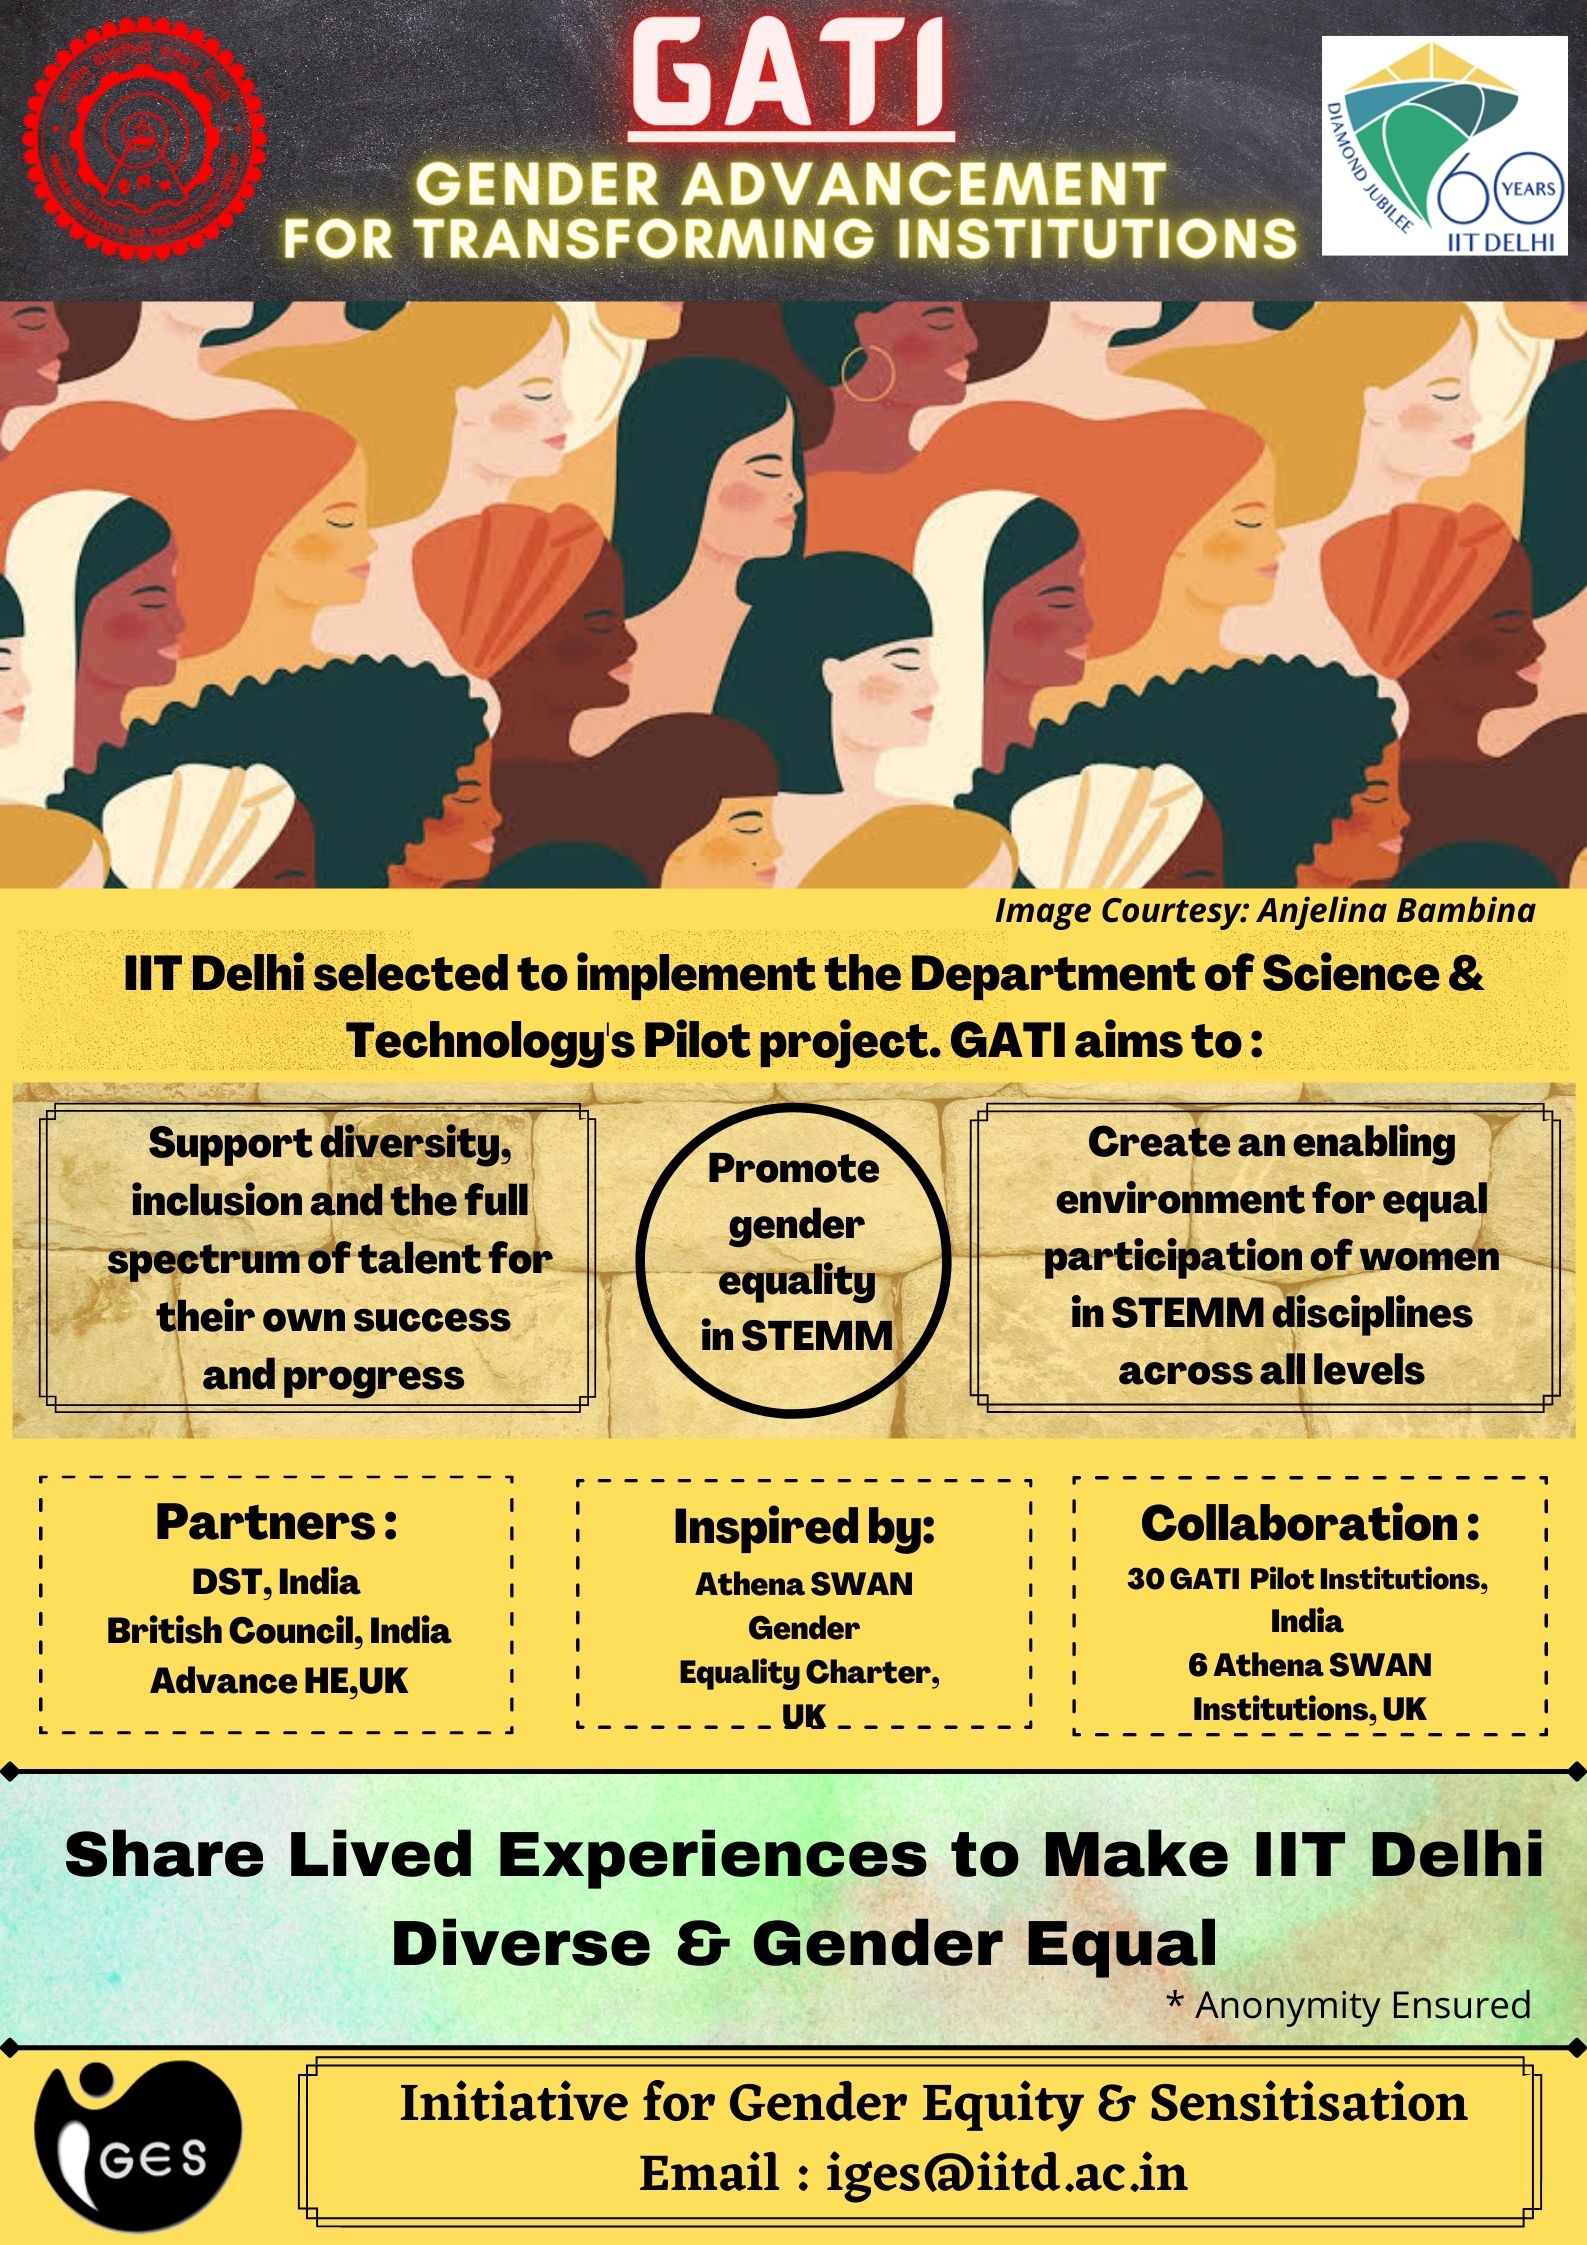 IIT Delhi's Project Management Certificate course: Your gateway to